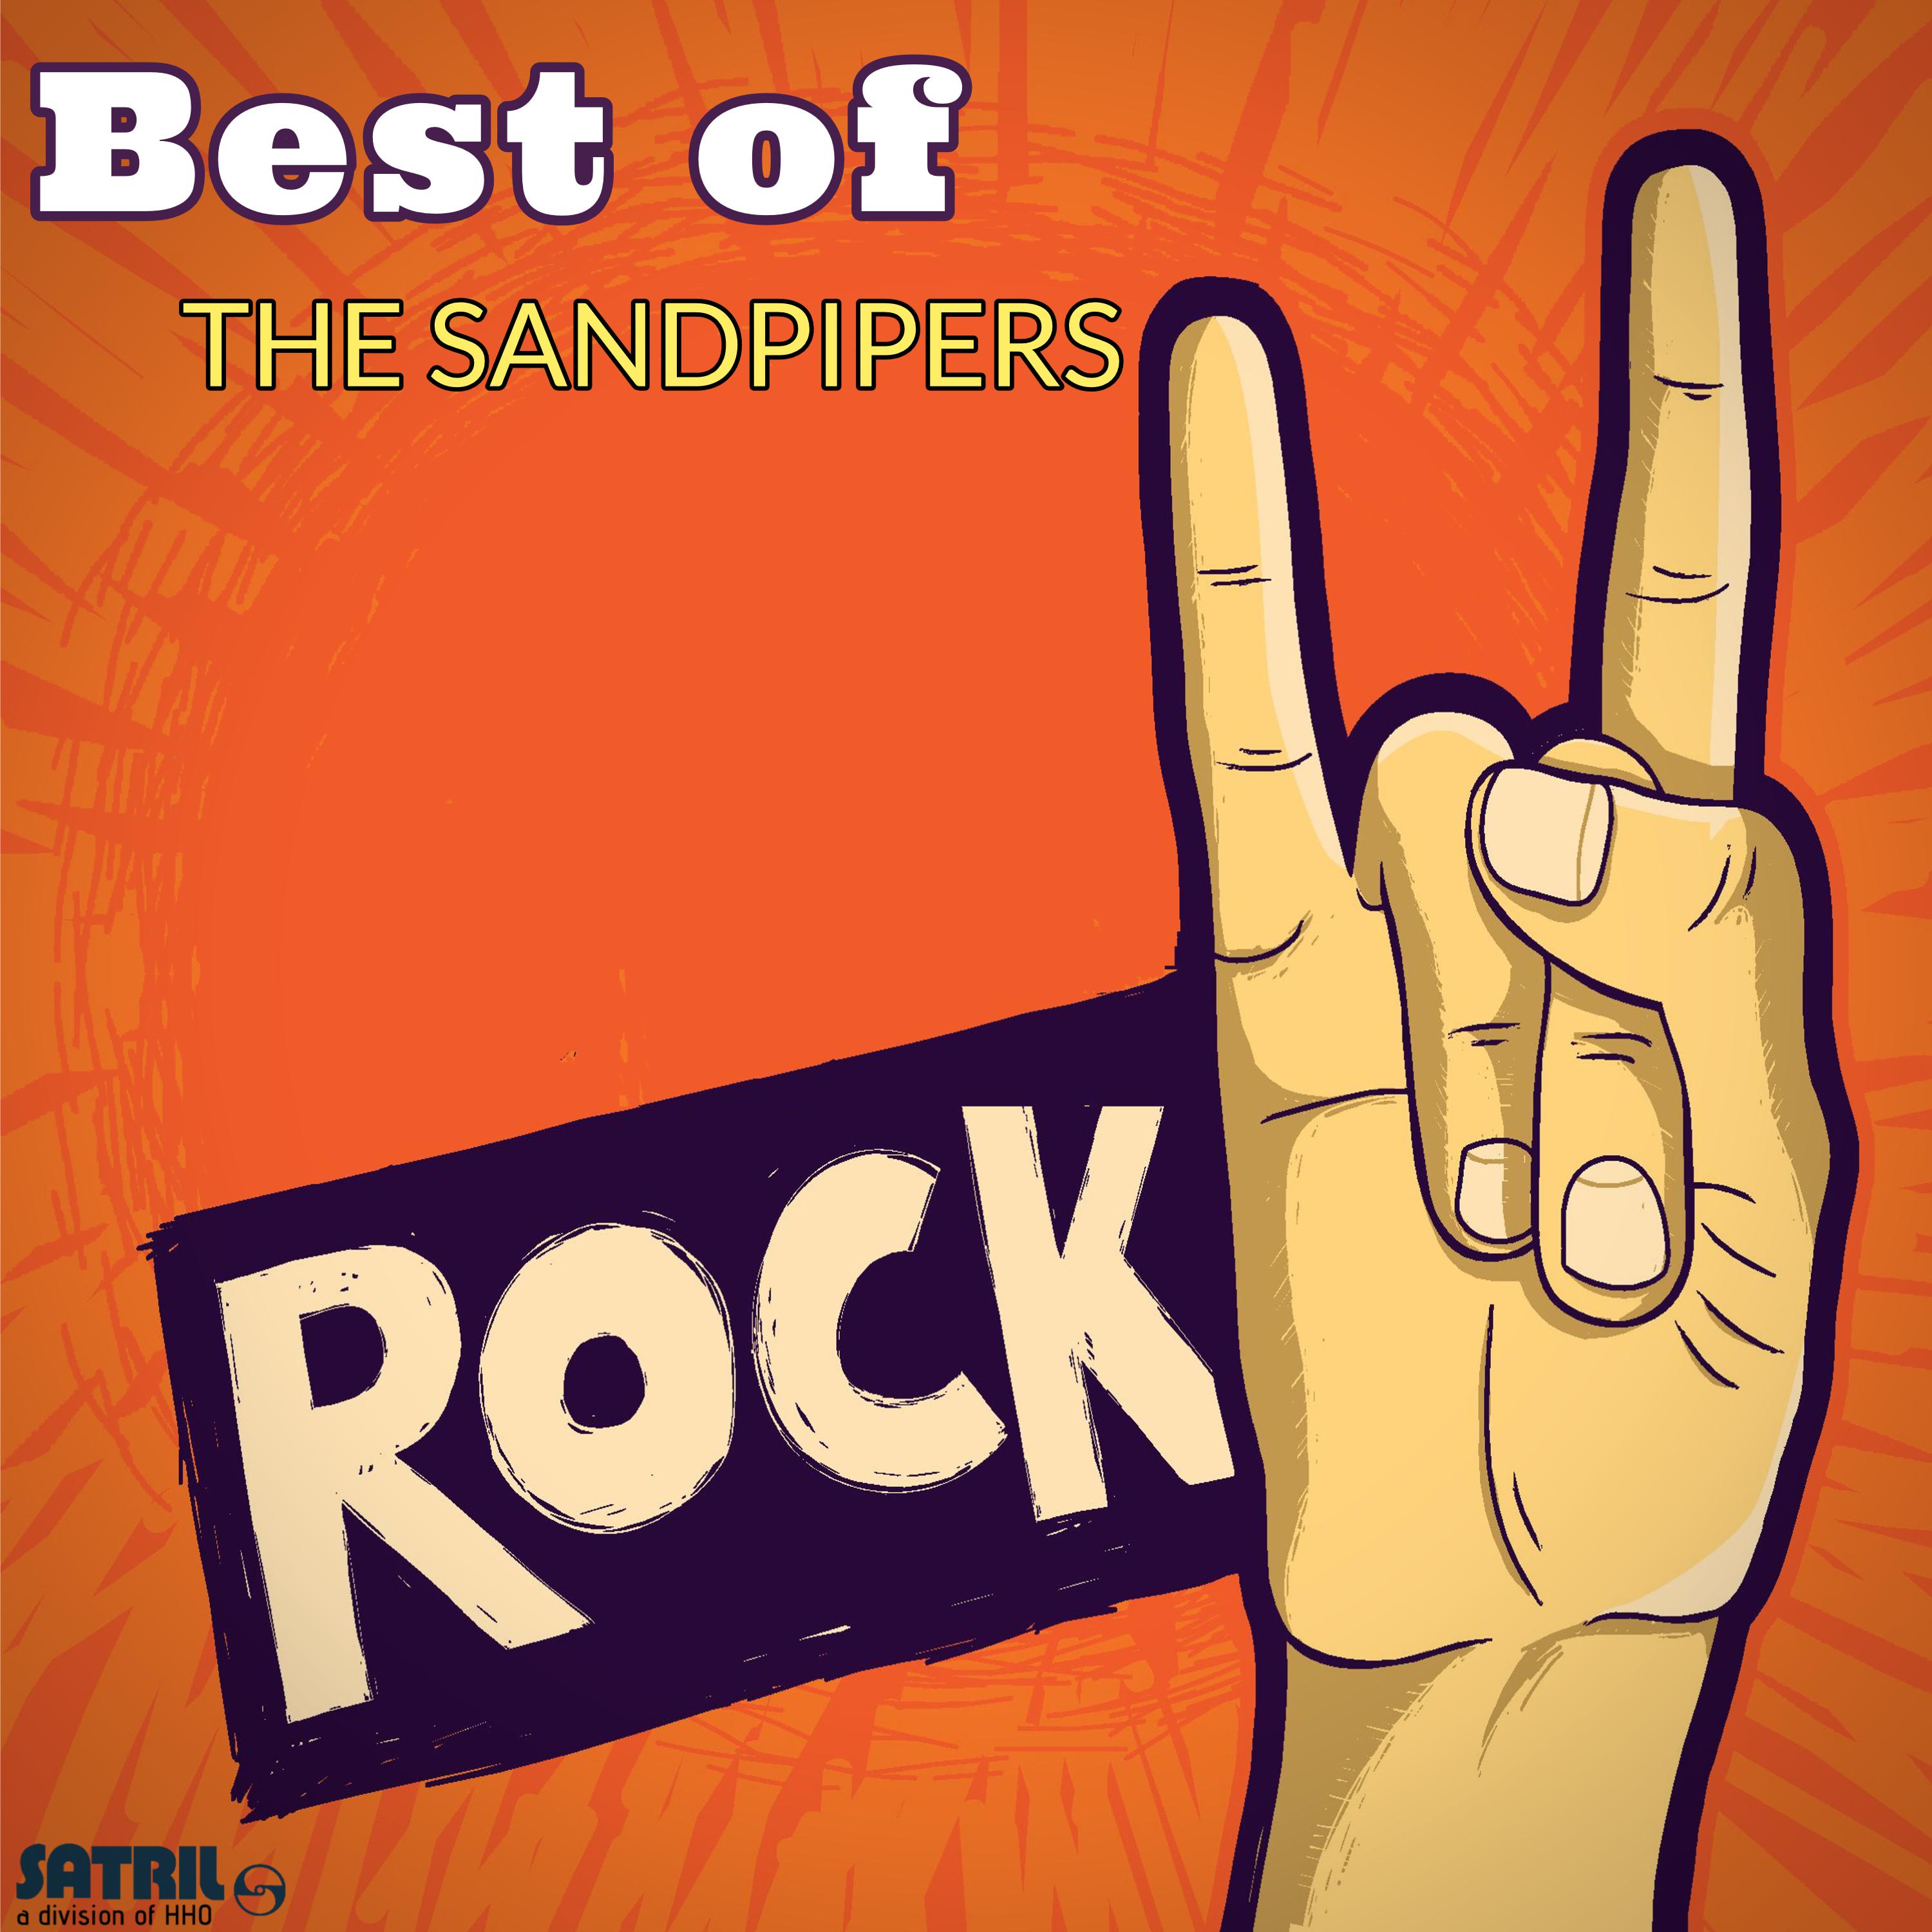 Best of The Sandpipers